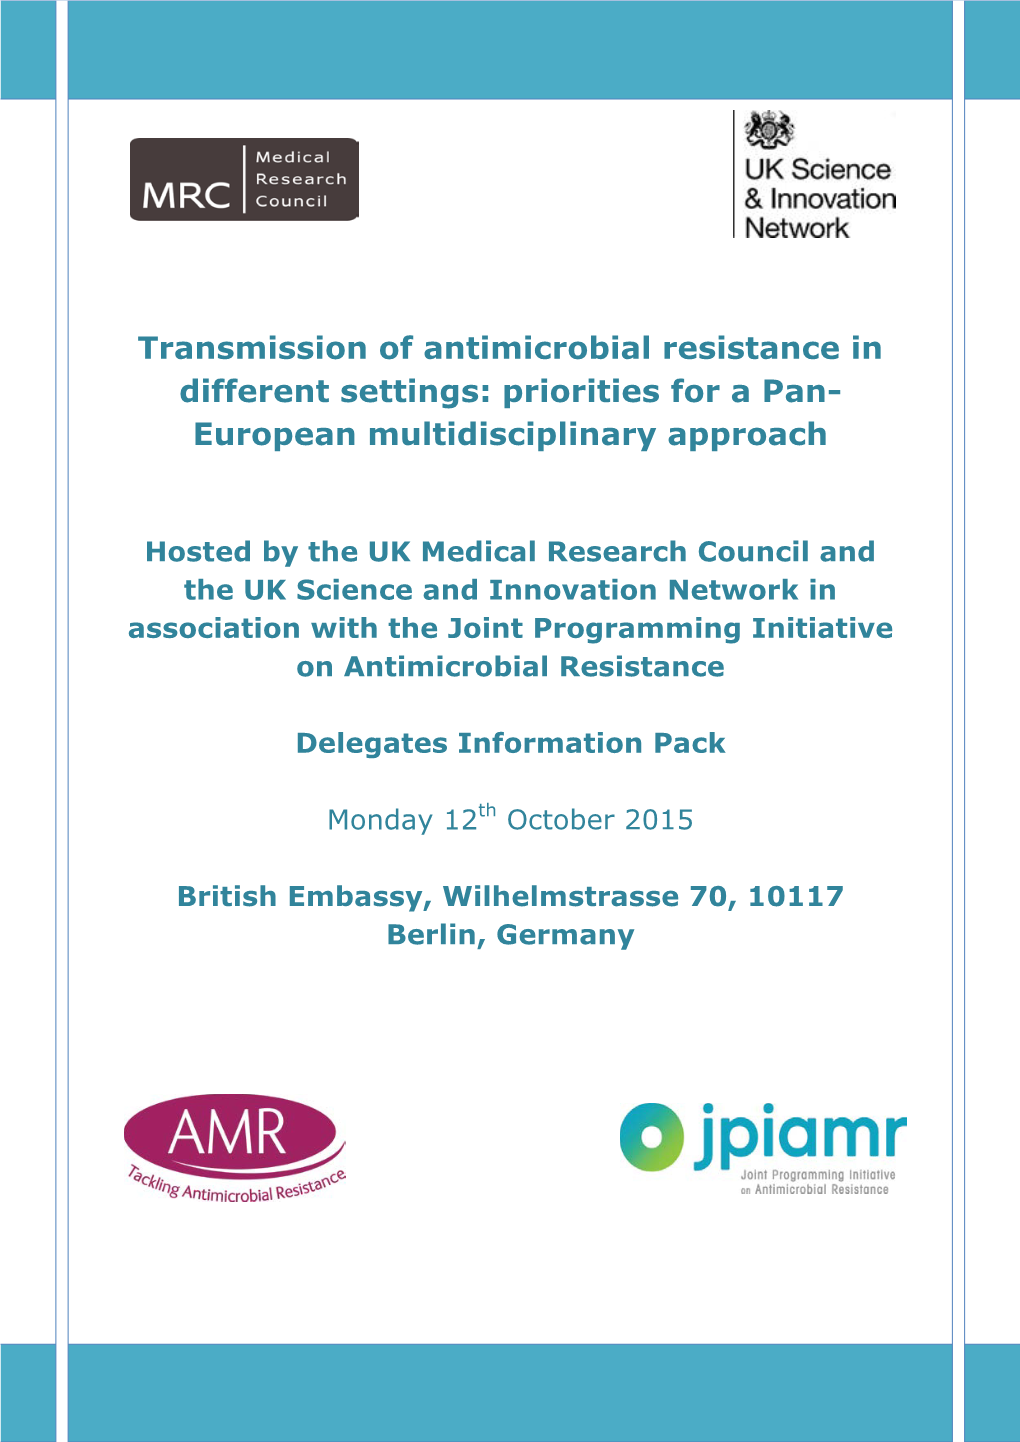 Transmission of Antimicrobial Resistance in Different Settings: Priorities for a Pan- European Multidisciplinary Approach